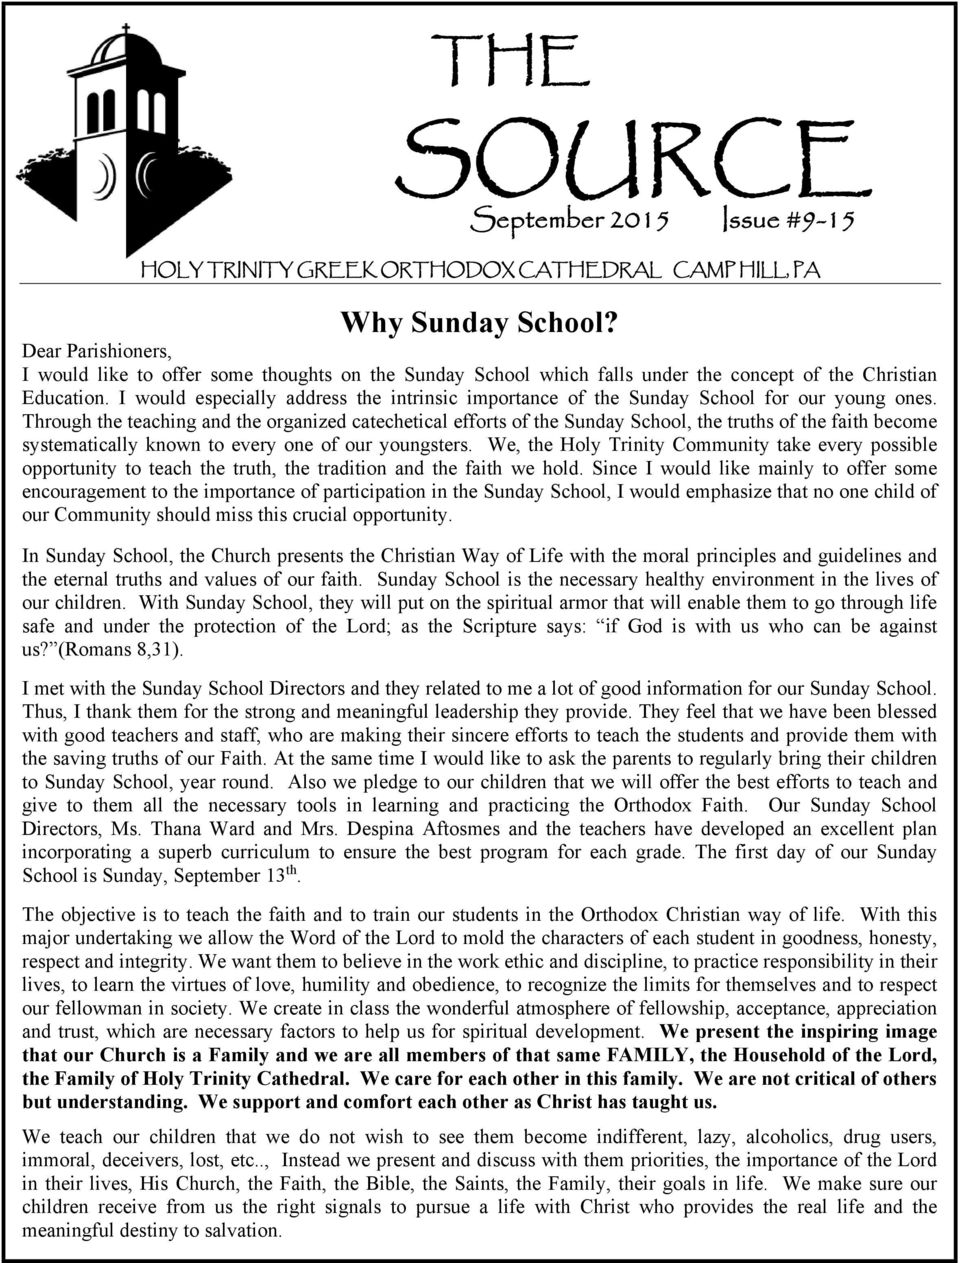 I would especially address the intrinsic importance of the Sunday School for our young ones.